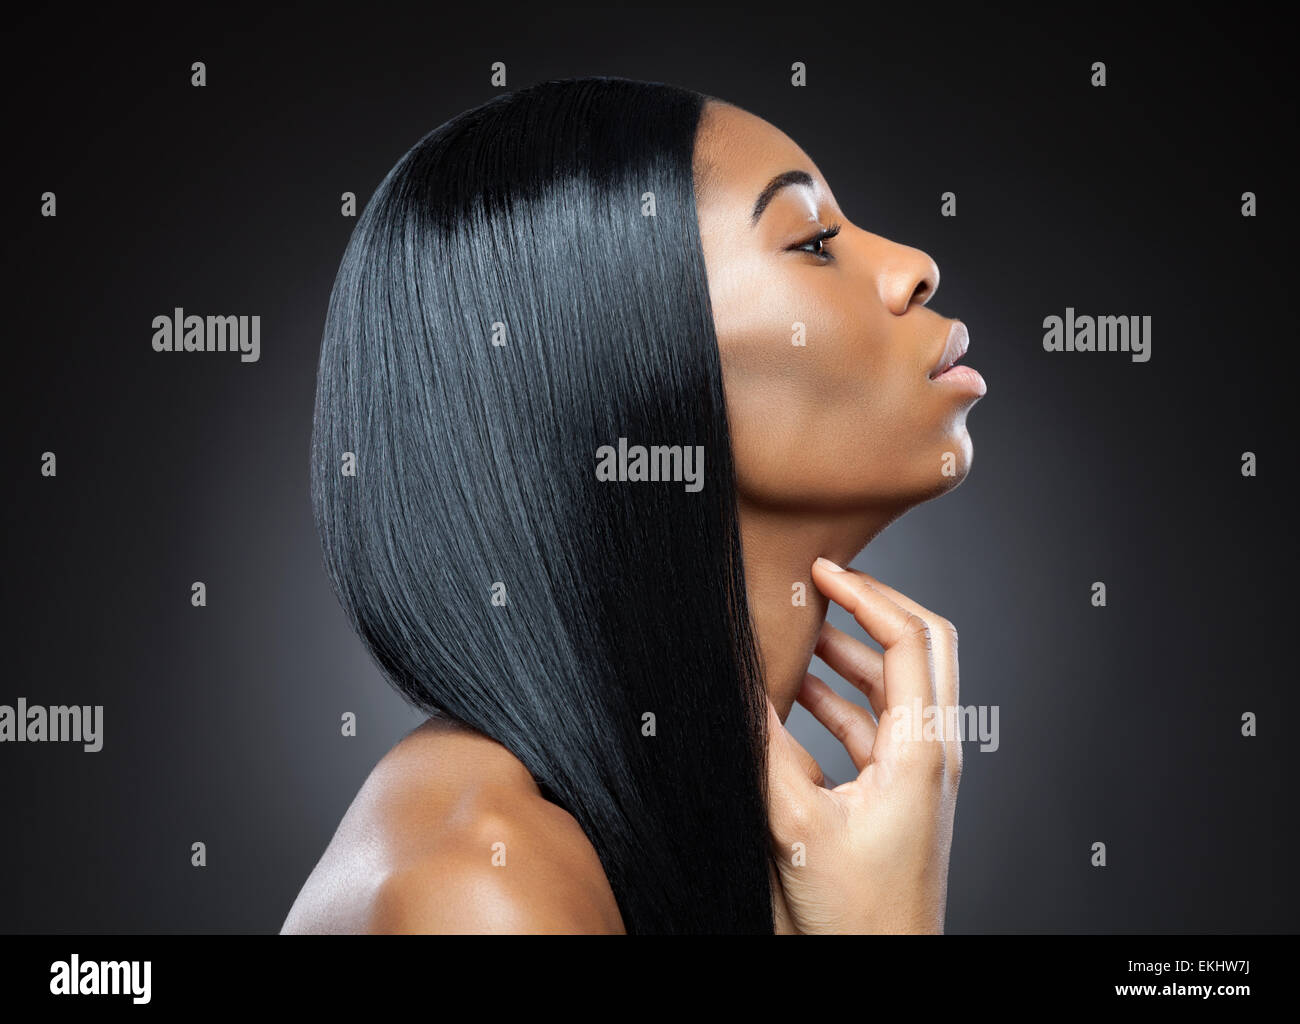 Profile of a black beauty with perfect straight and shiny hair Stock Photo